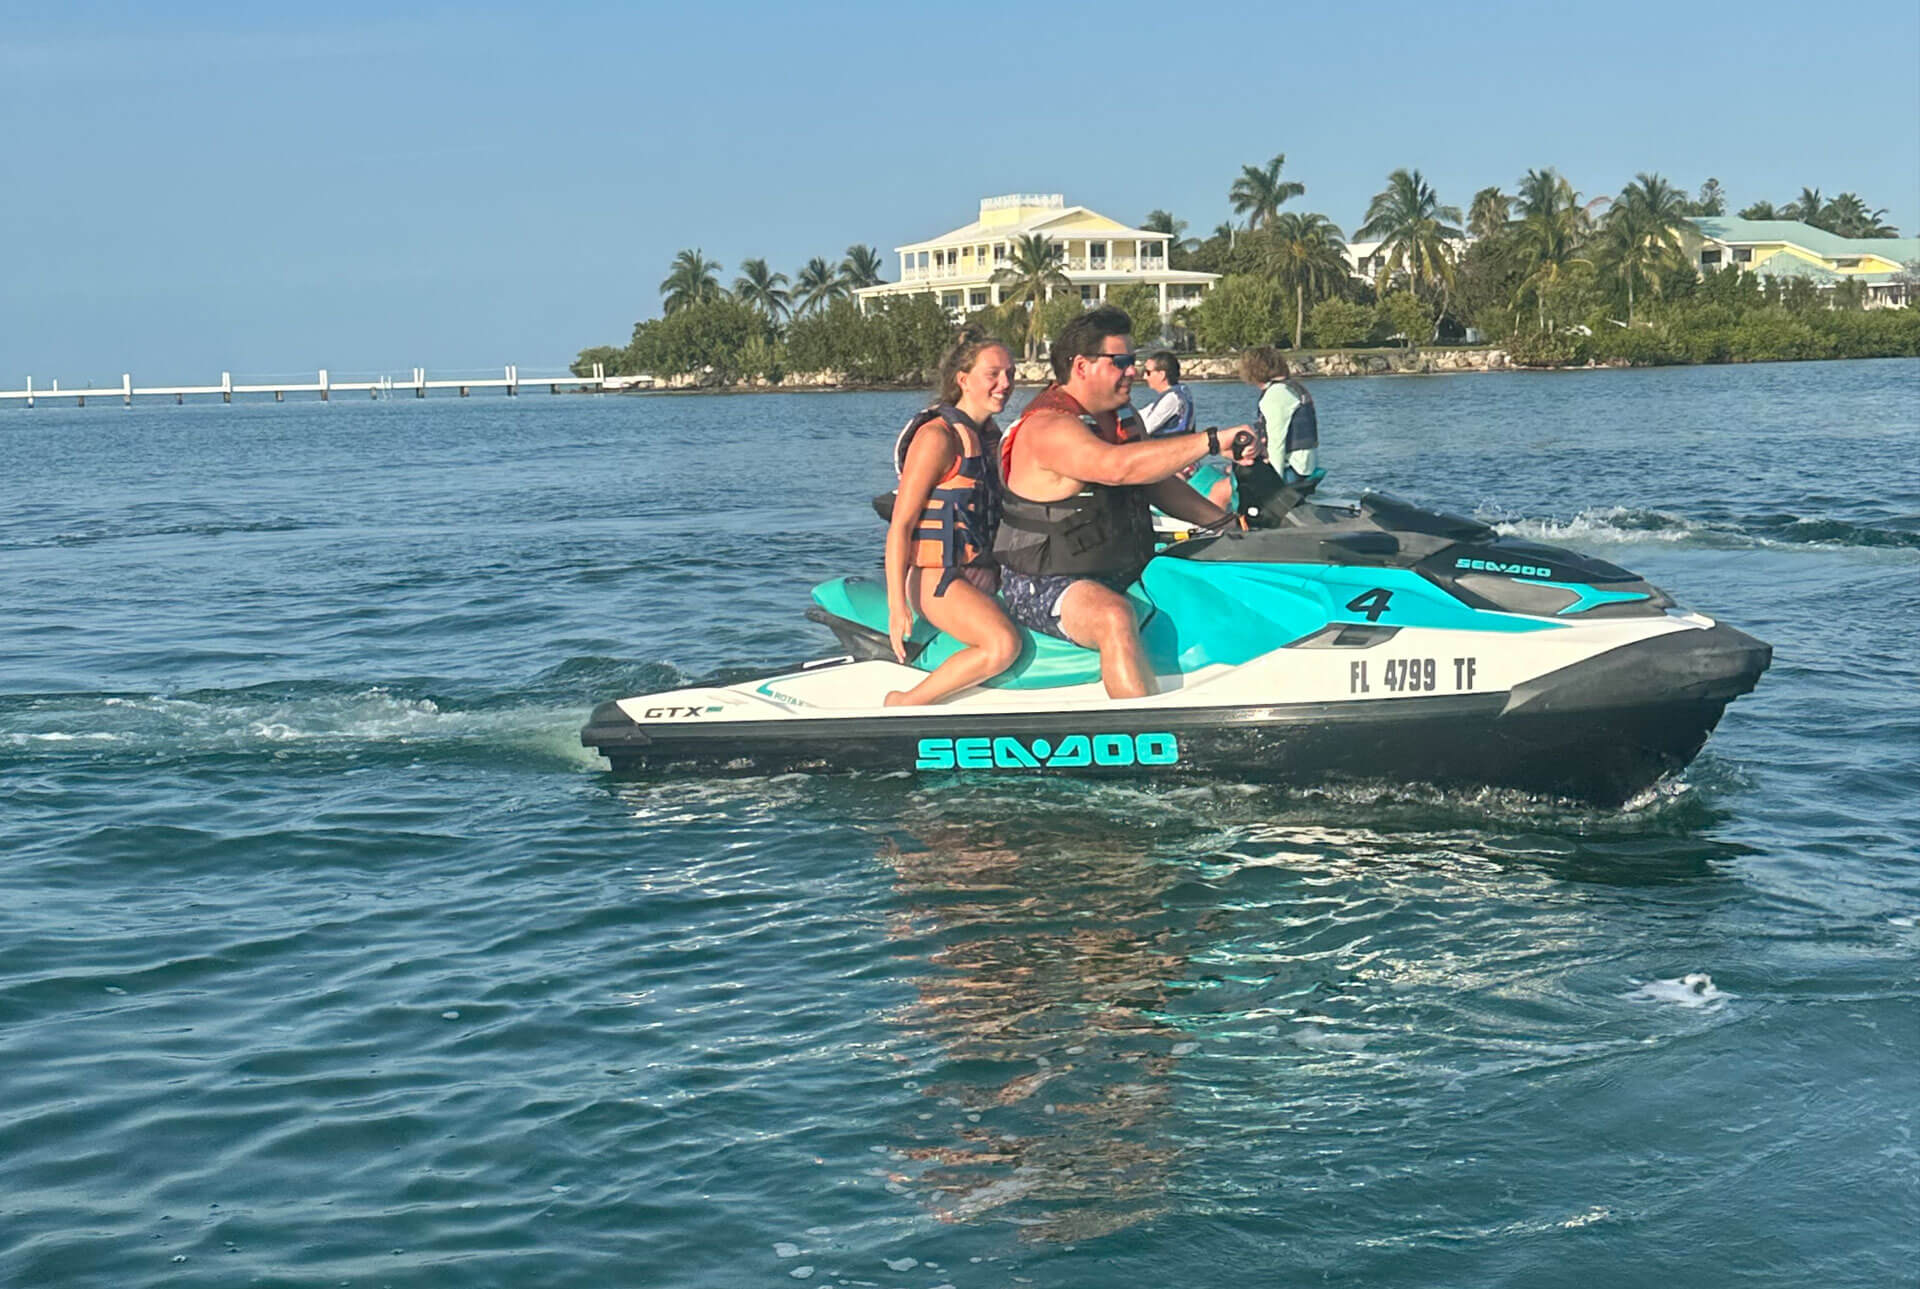 A man and two women on a jet ski.